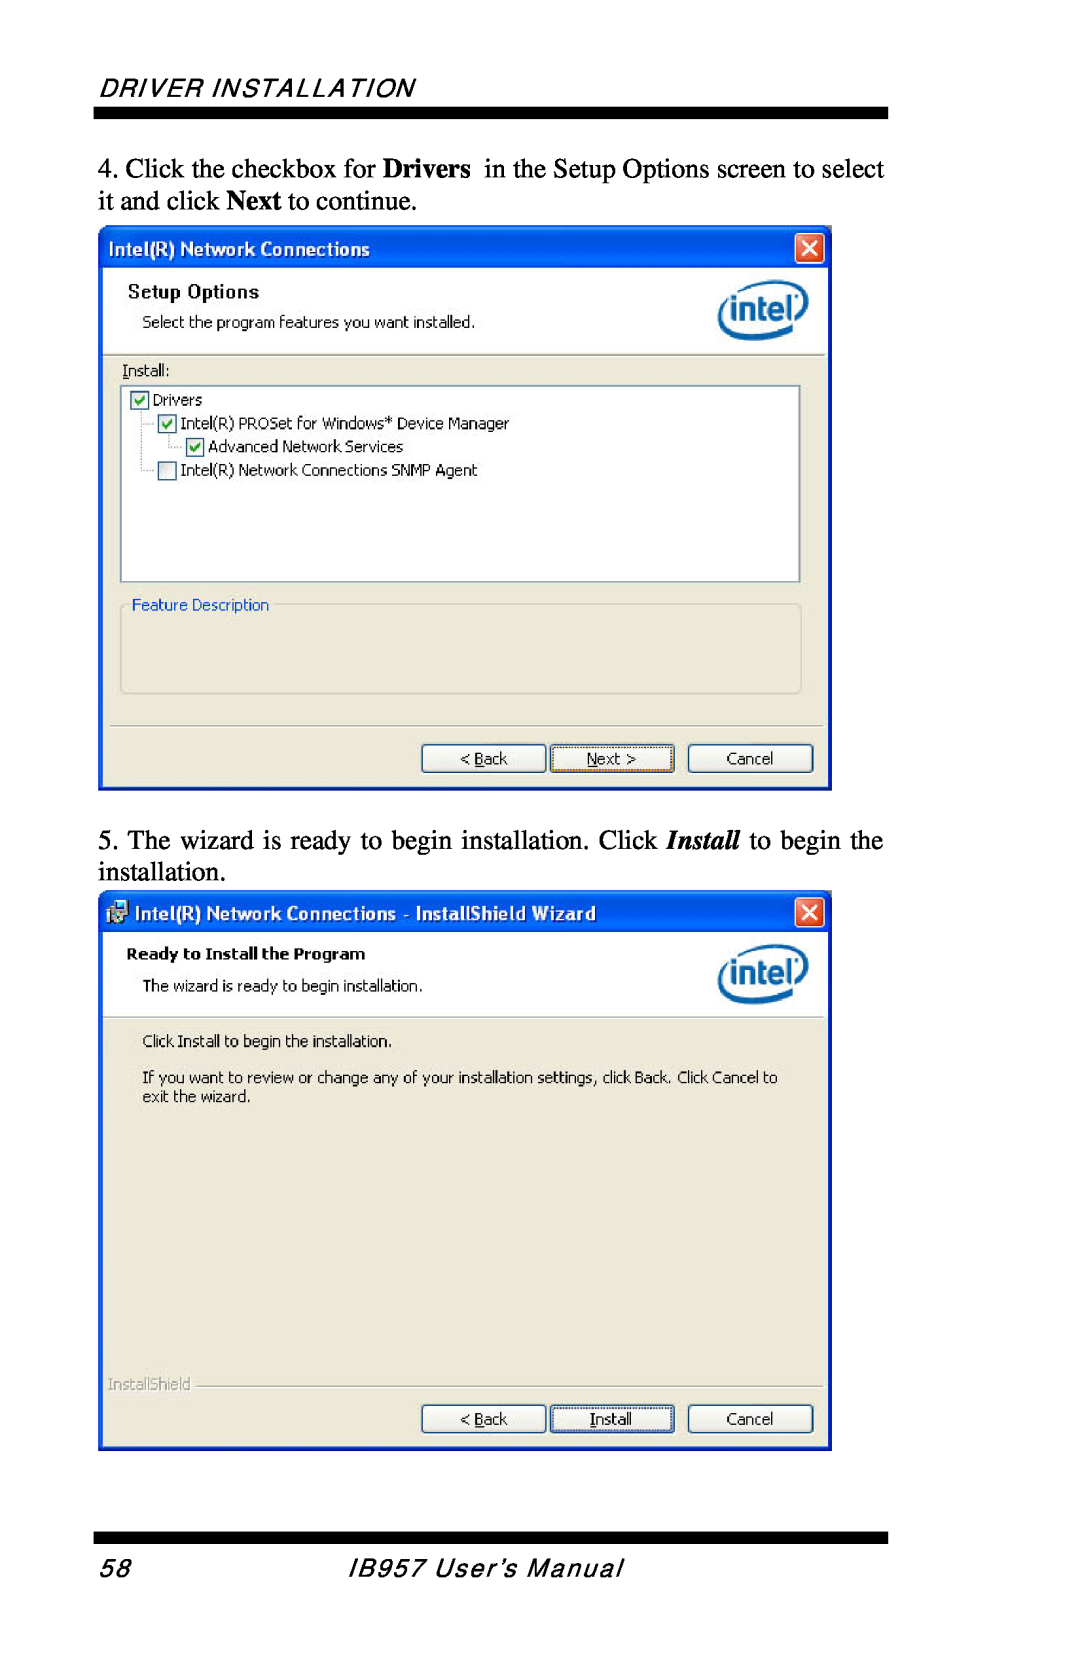 Intel IB957 user manual Click the checkbox for Drivers in the Setup Options screen to select it and click Next to continue 